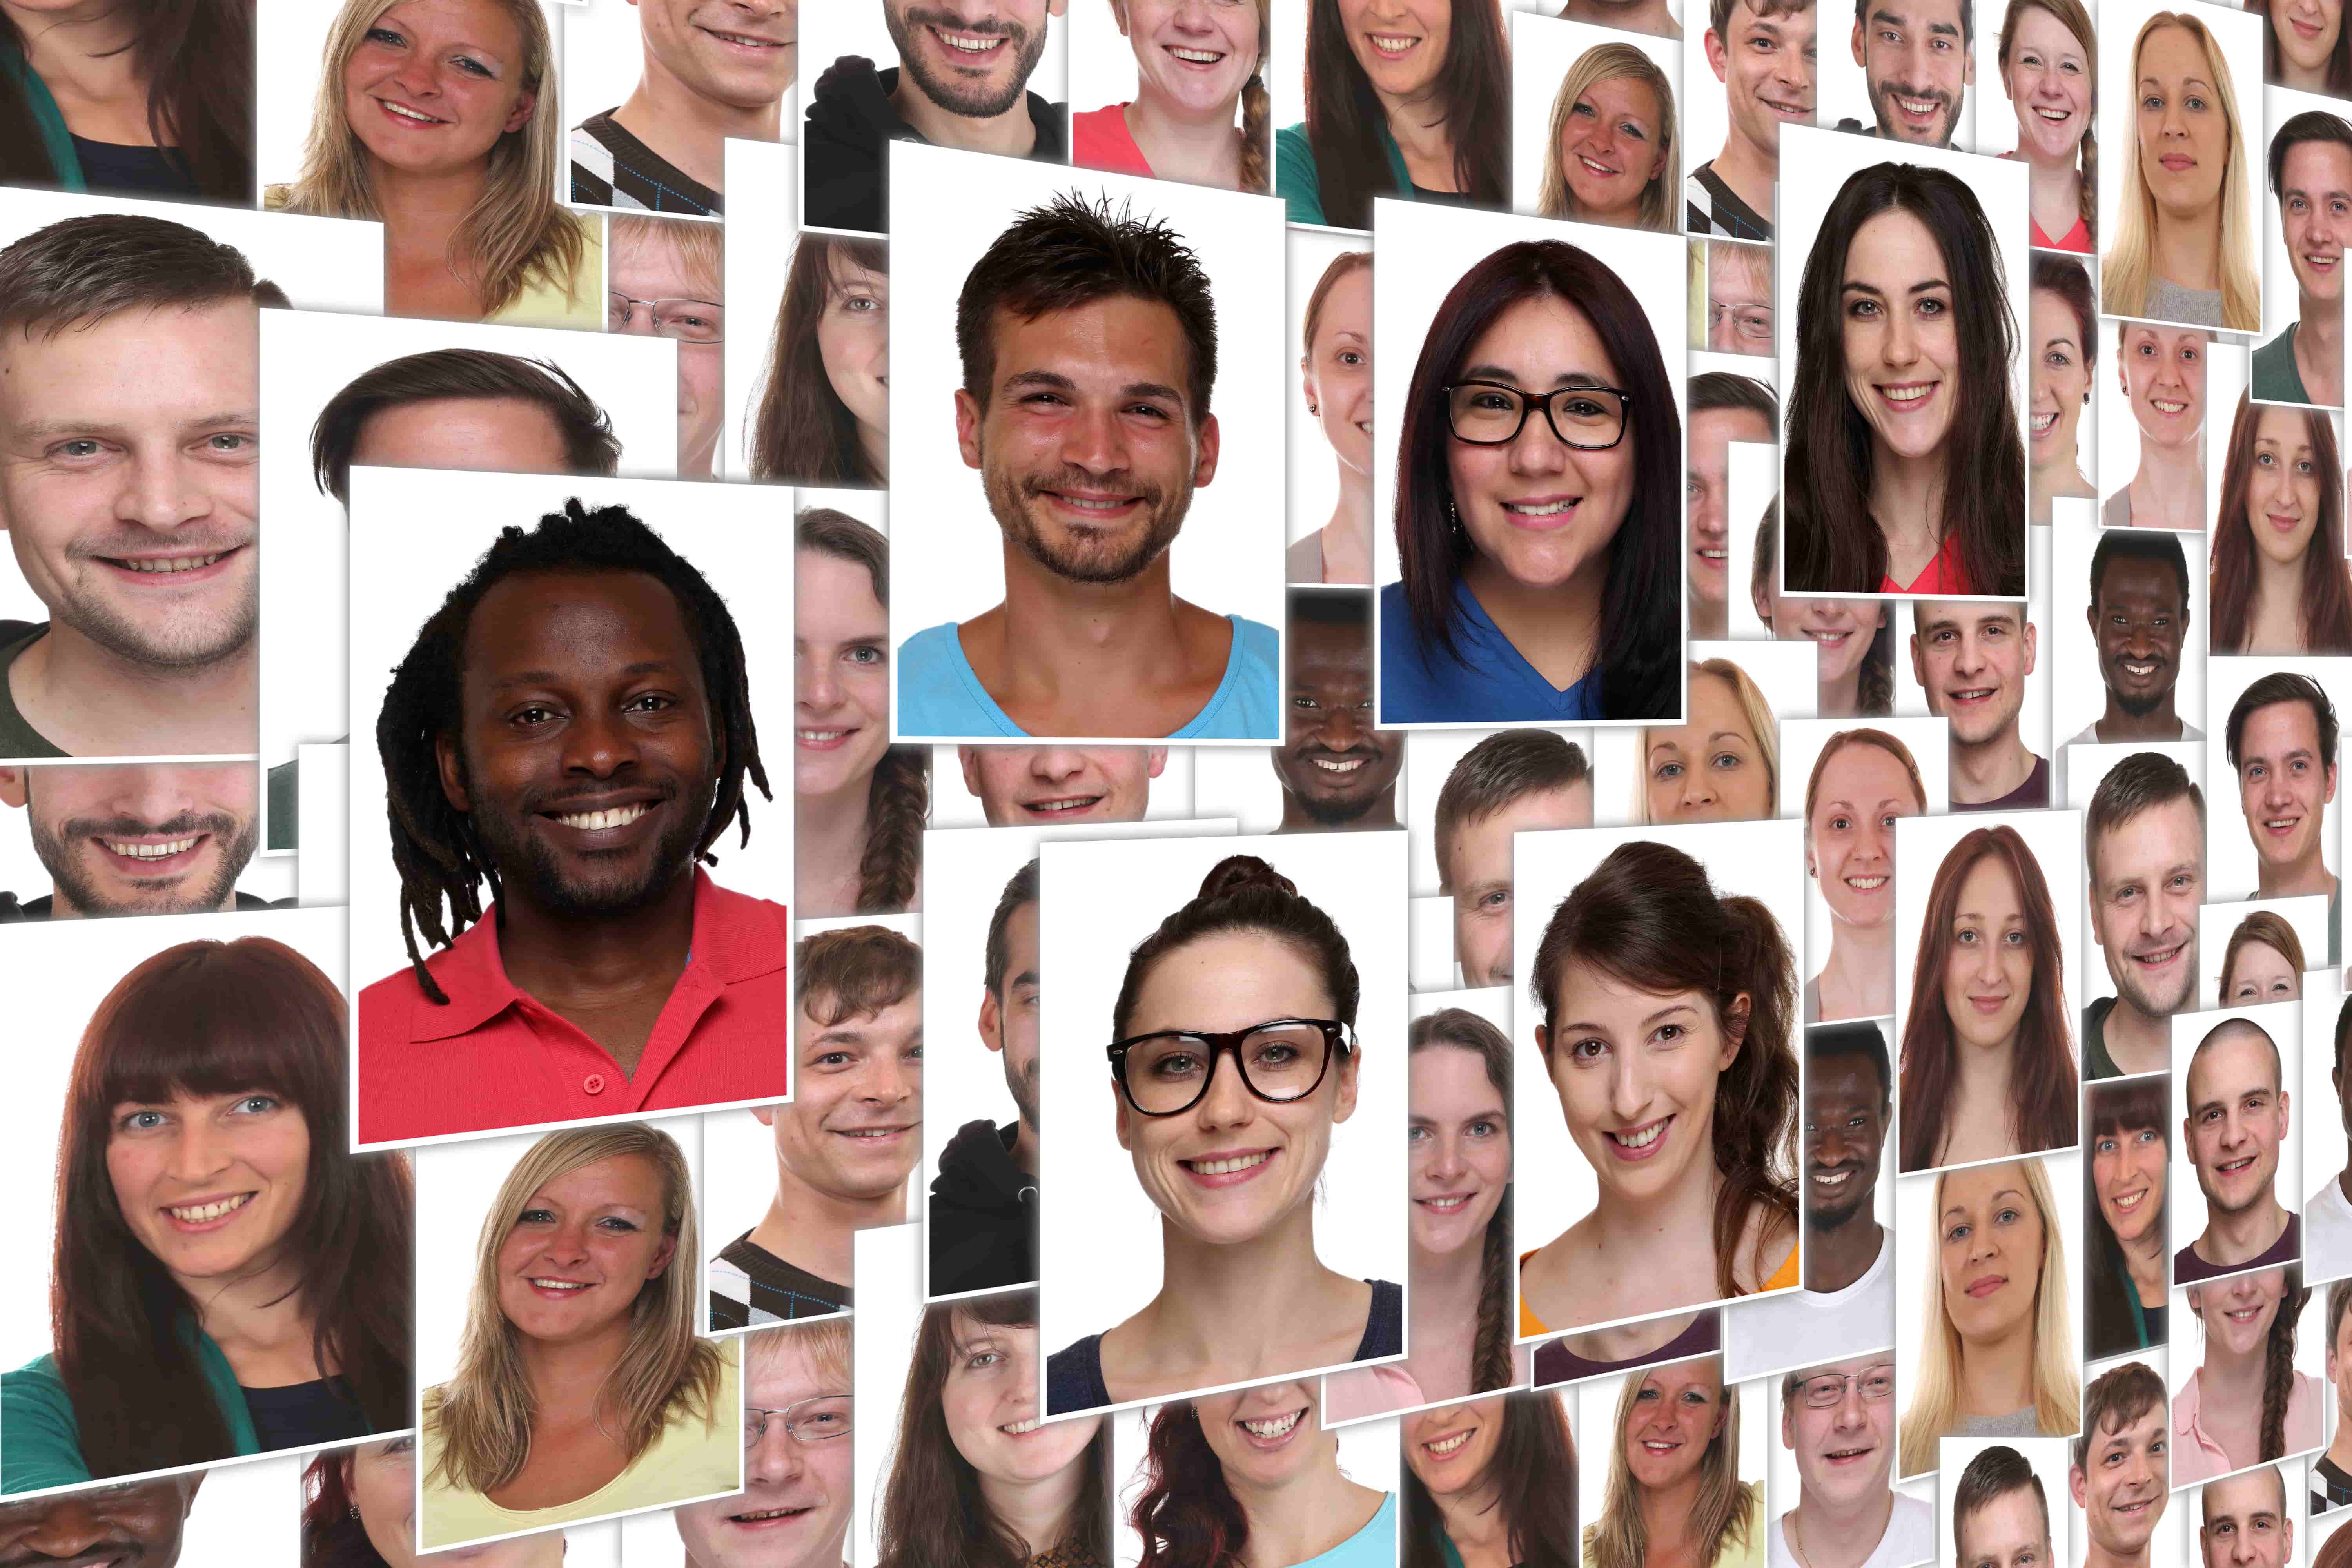 Composite containing many photos of individuals from different ethnic groups, about evenly divided between males and females; prefer photos arranged in haphazard manner as in top reference image rather than in a neat grid